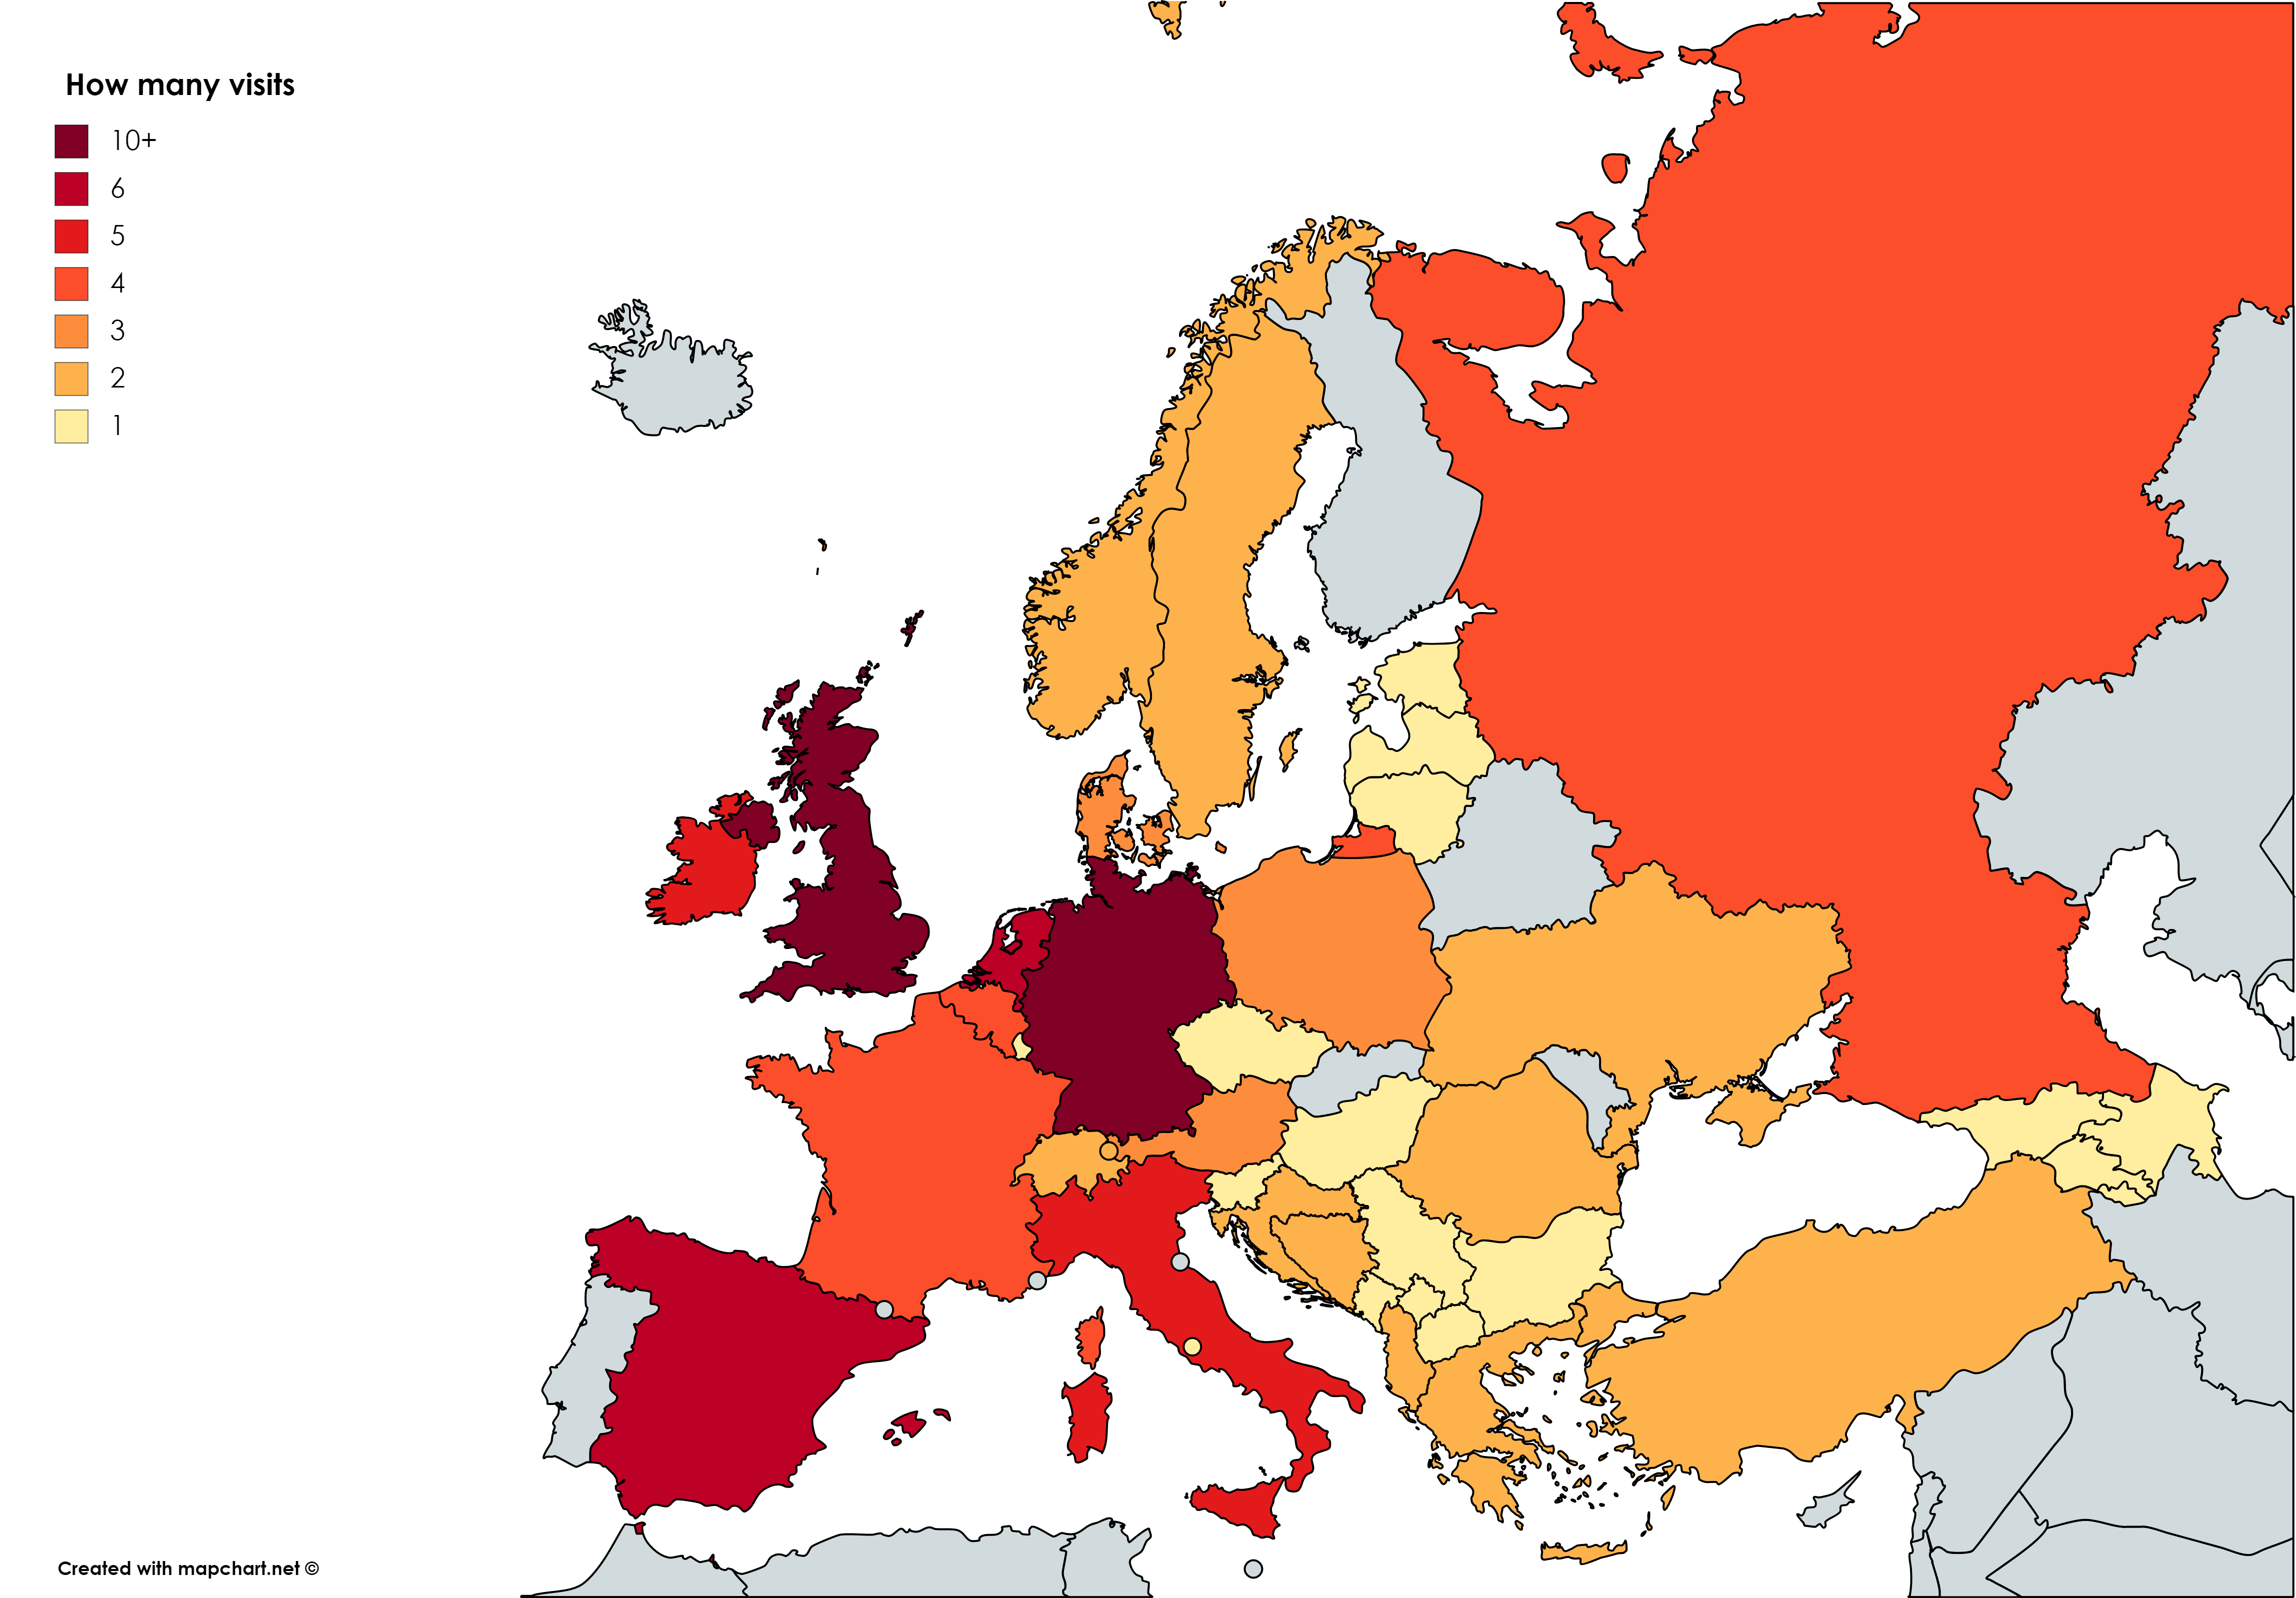 Countries I've visited in Europe - February 2019